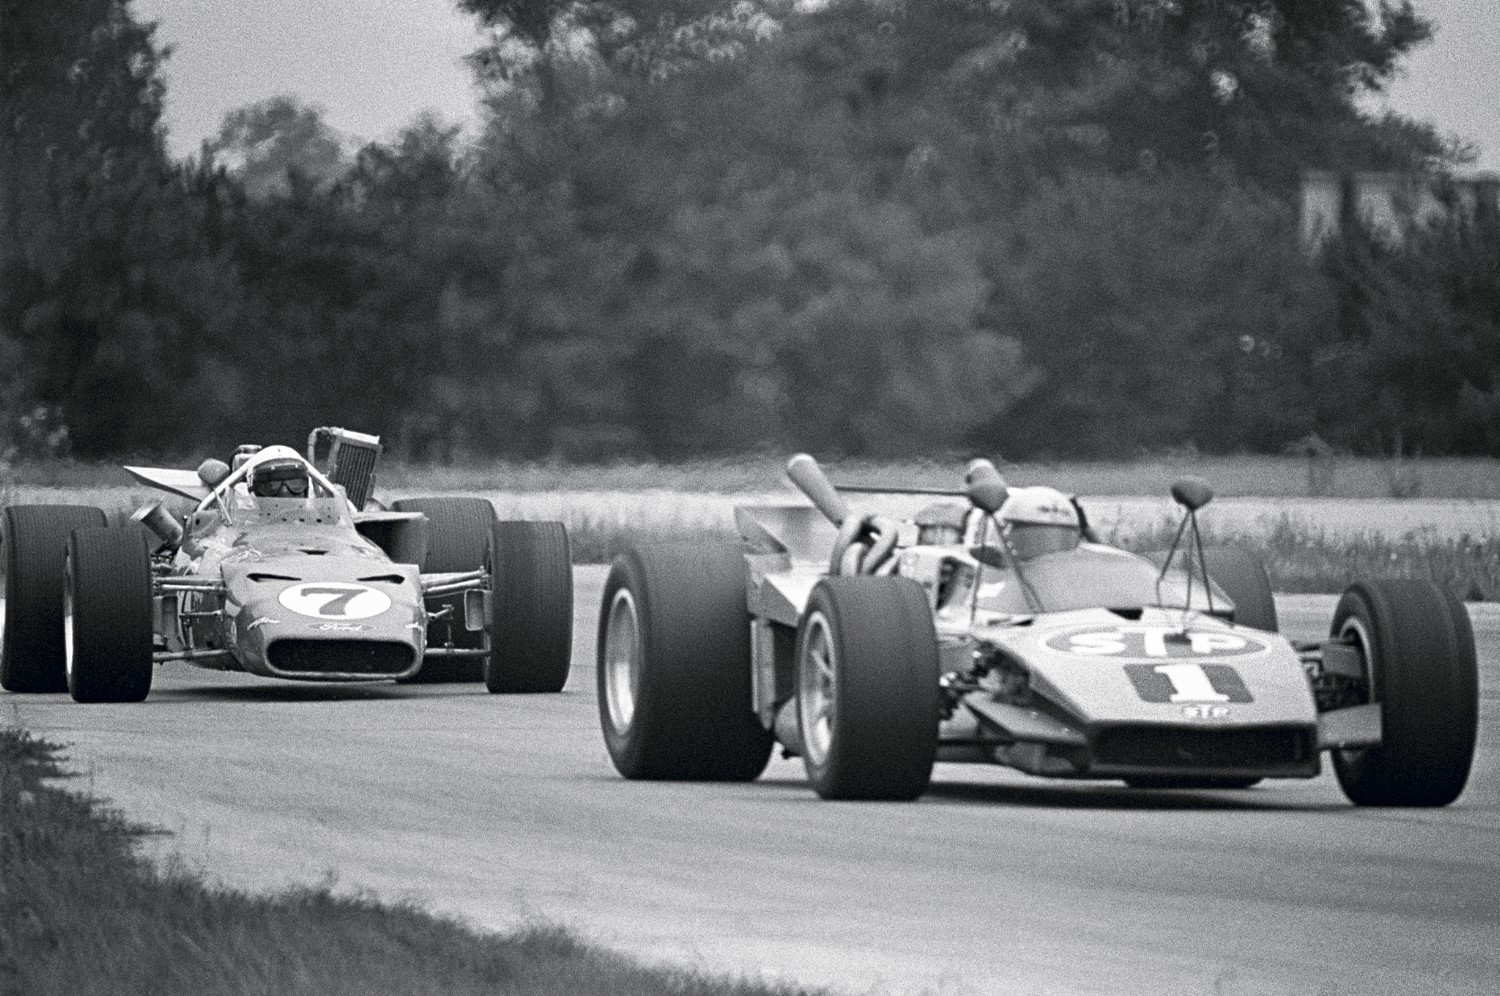 Andretti leads Foyt at Castle Rock in 1971